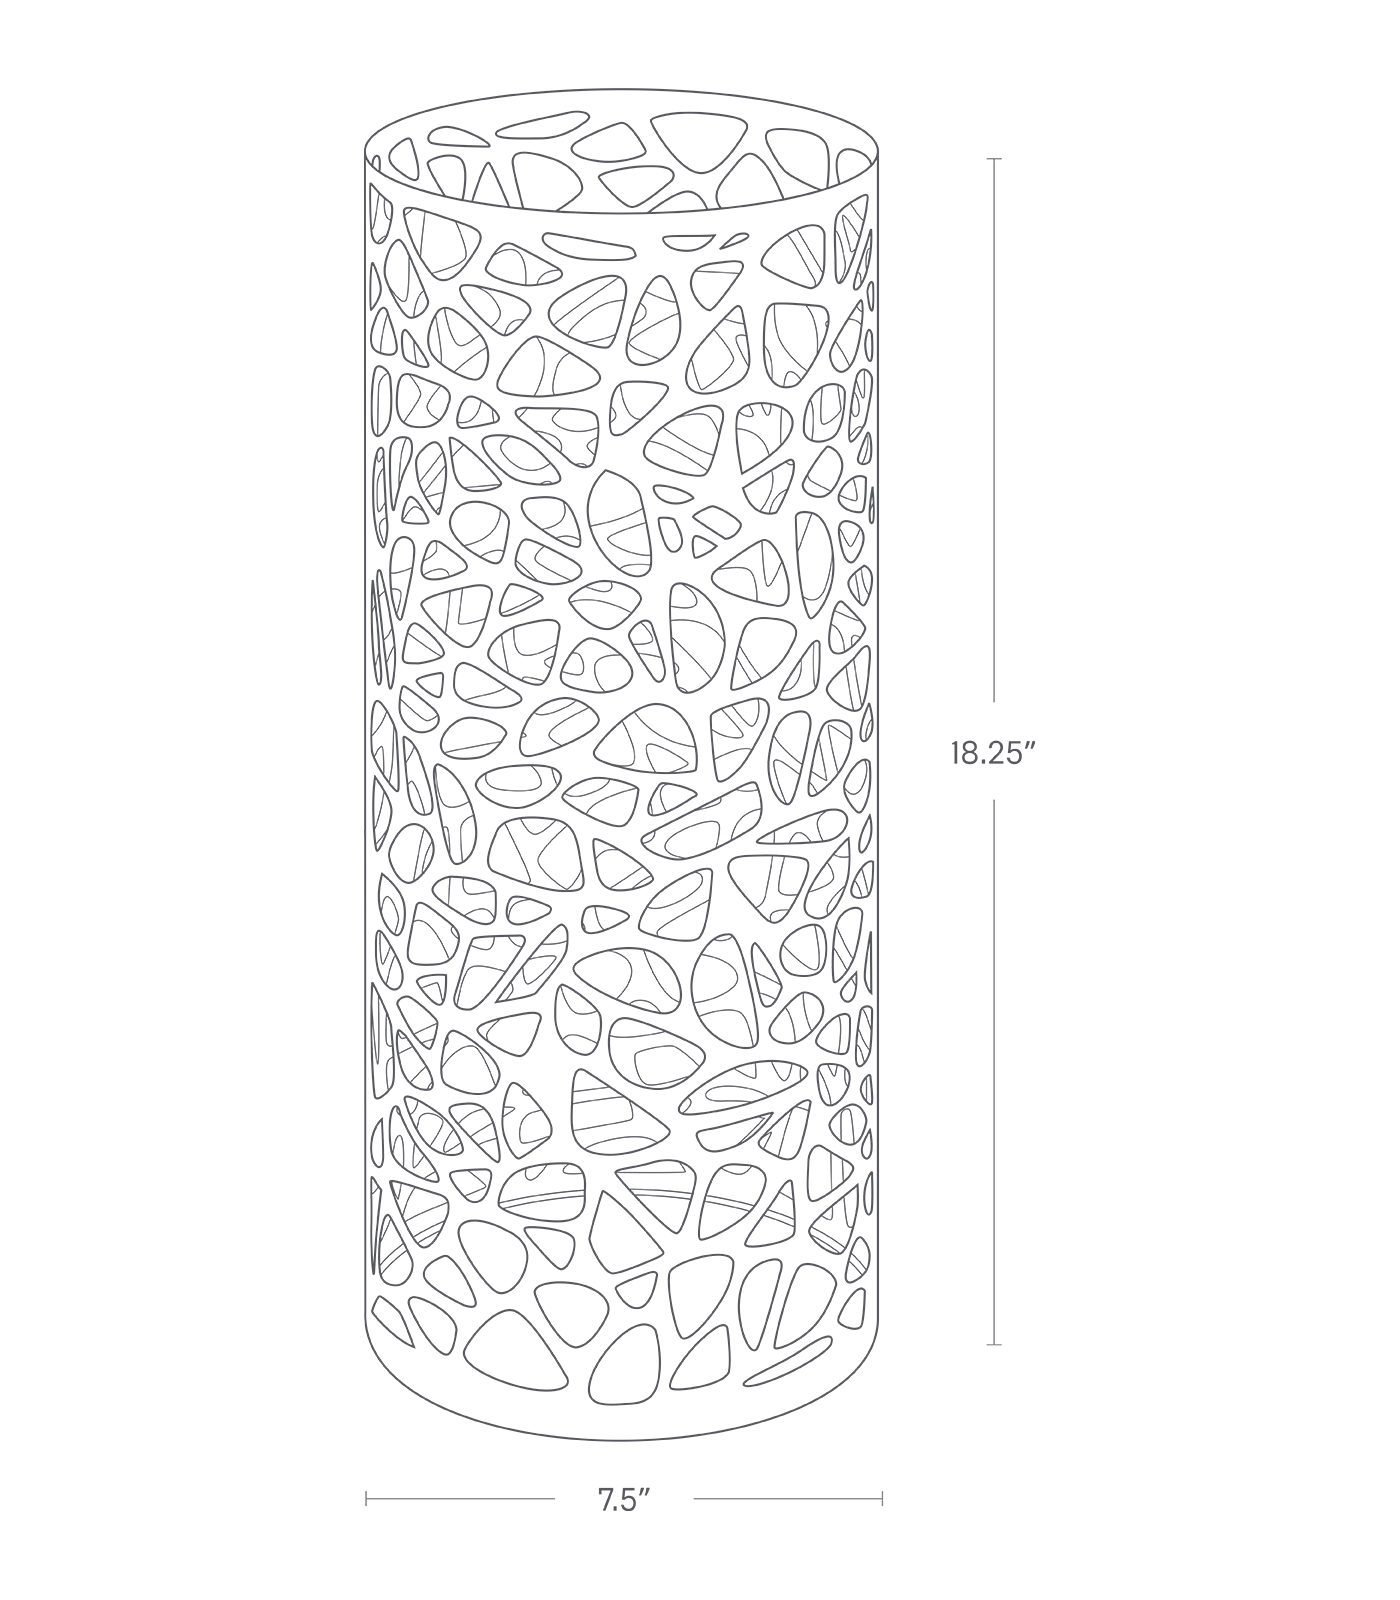 Dimension image for Umbrella Stand showing height of 18.25